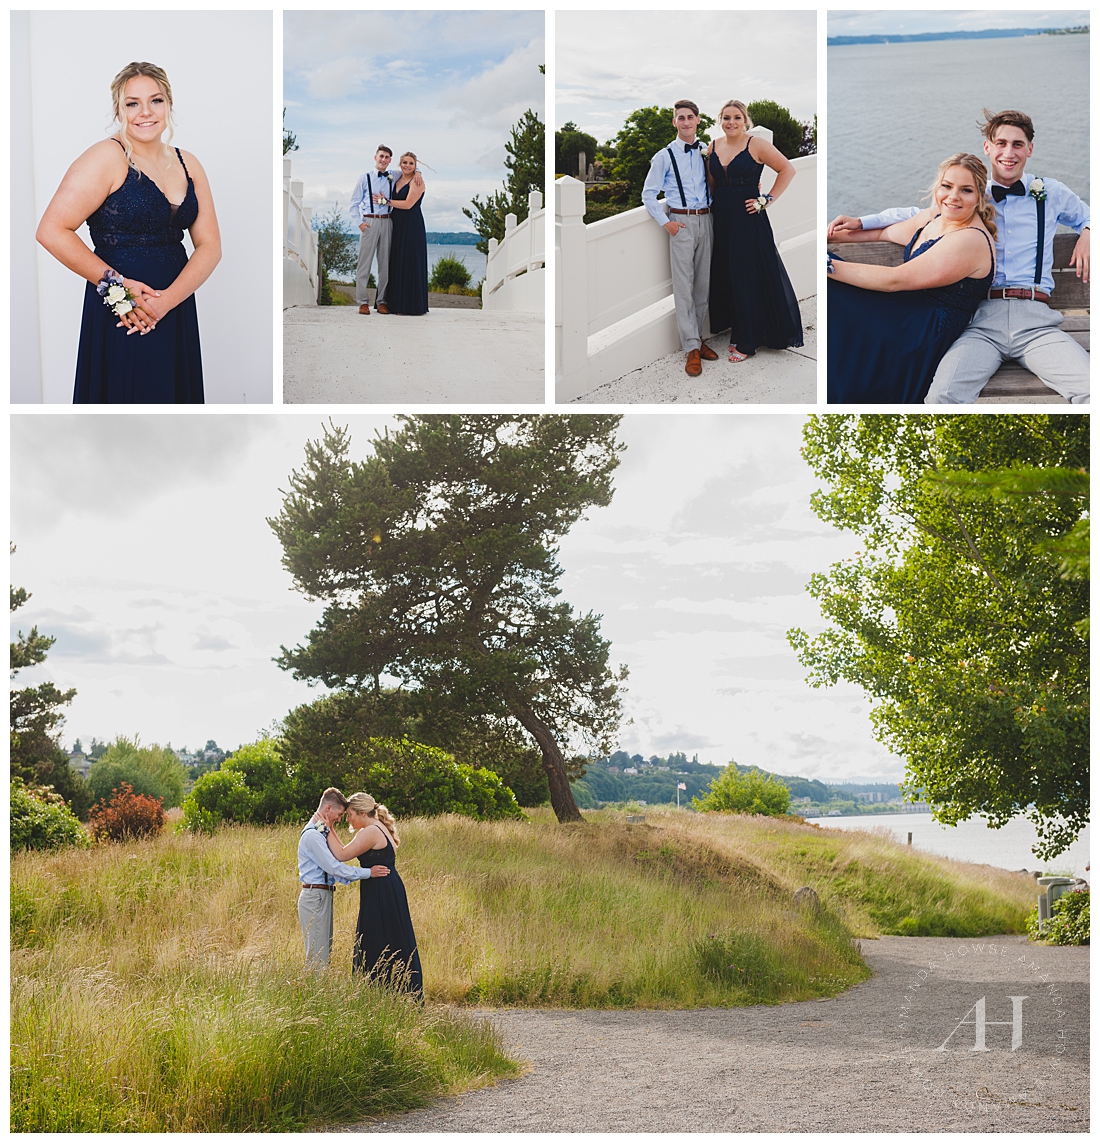 Outdoor Prom Portraits in Tacoma Park | Amanda Howse Photography